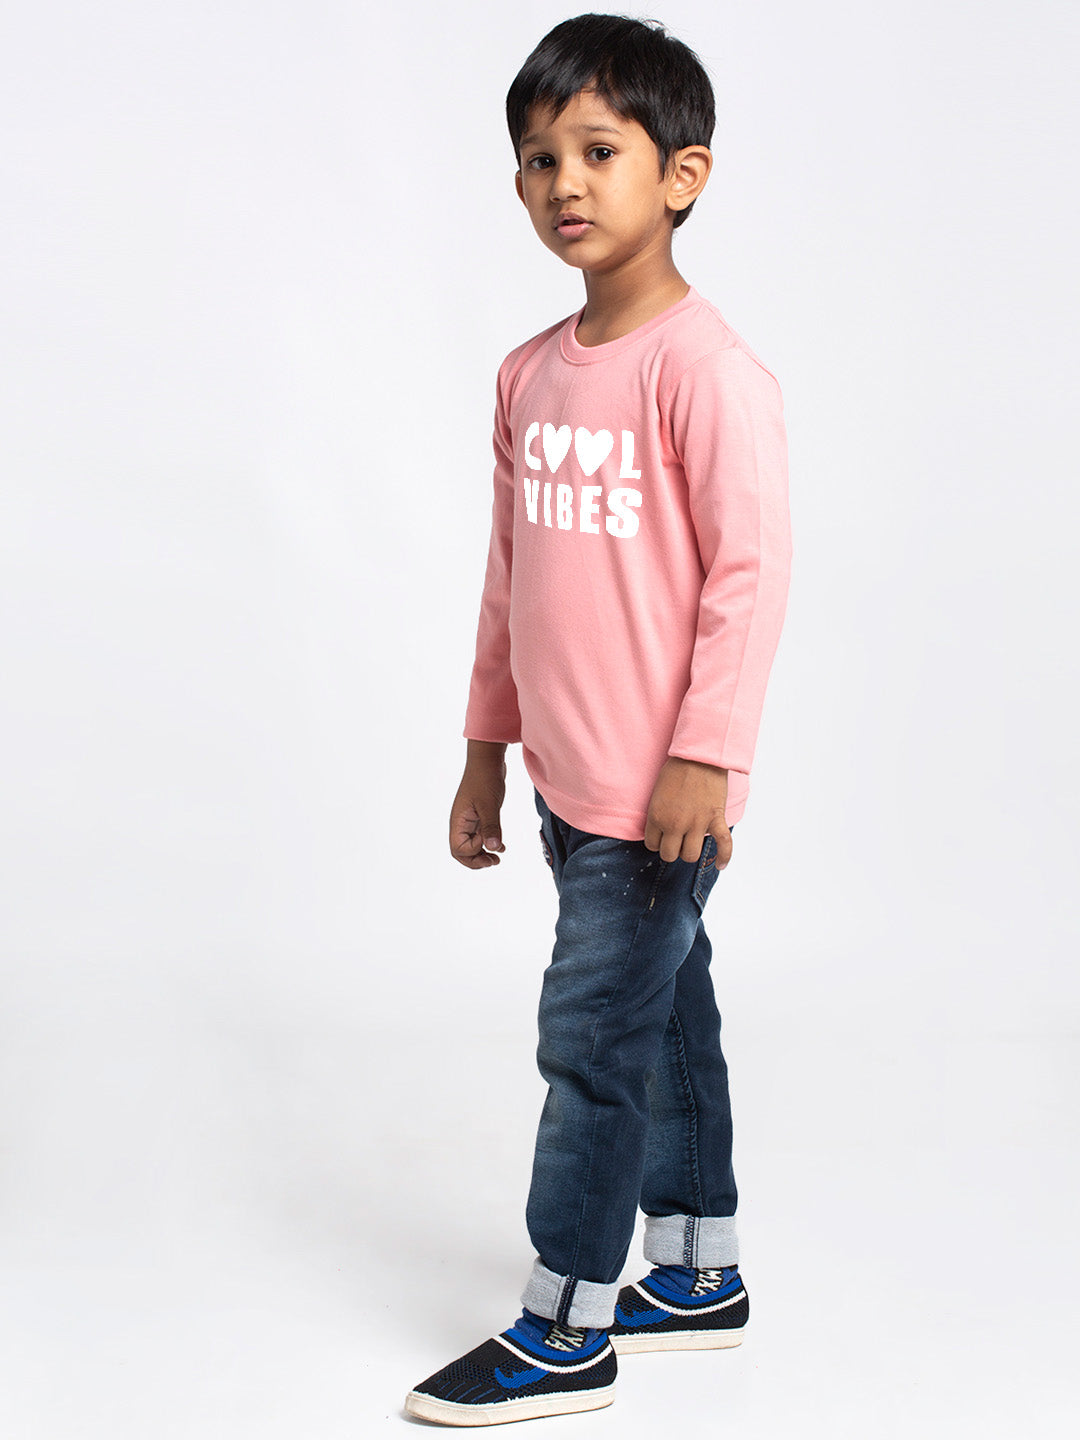 Kids cool vibes printed full sleeves t-shirt - Friskers